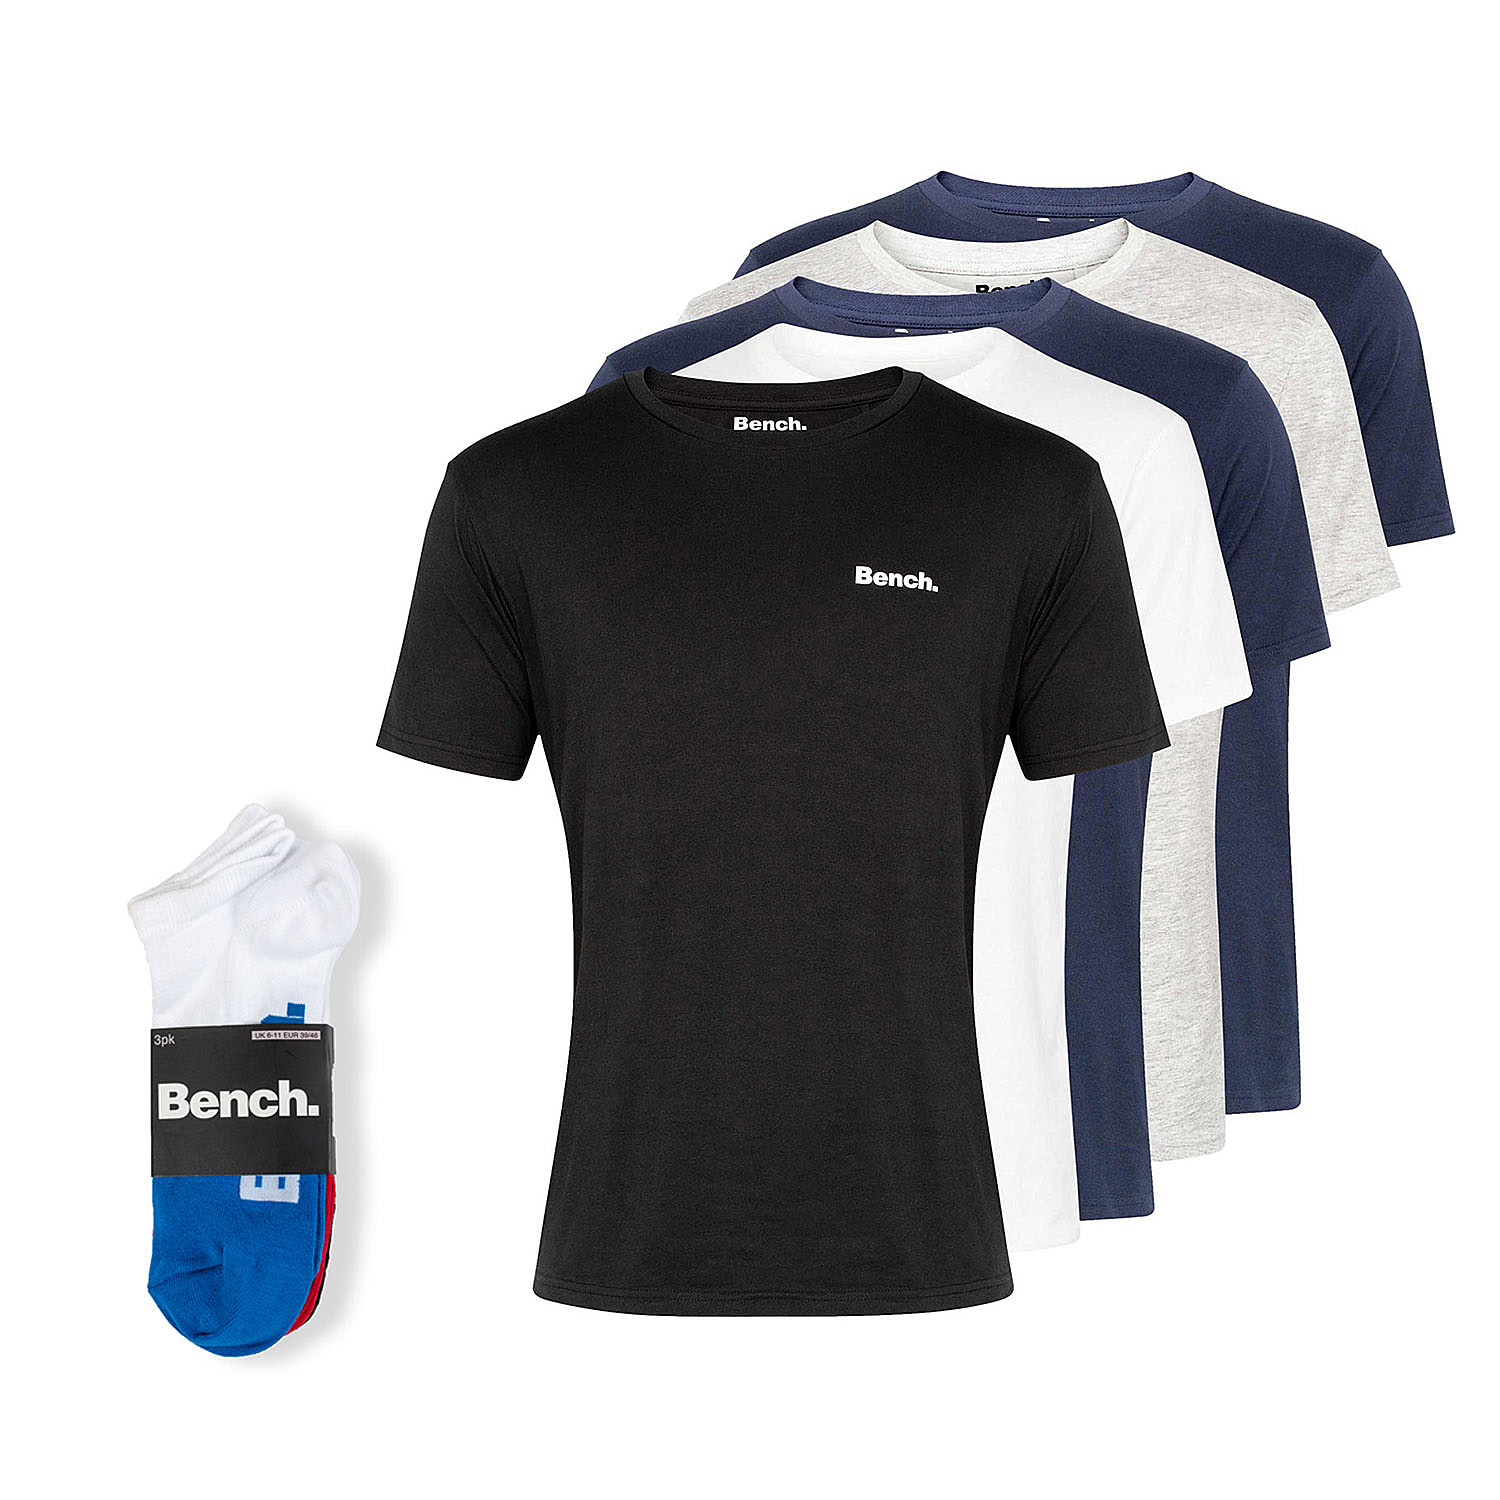 5-Pack-Bench-T-Shirt-with-Free-Socks-Size-M-White-Black-Grey-and-2x-Na